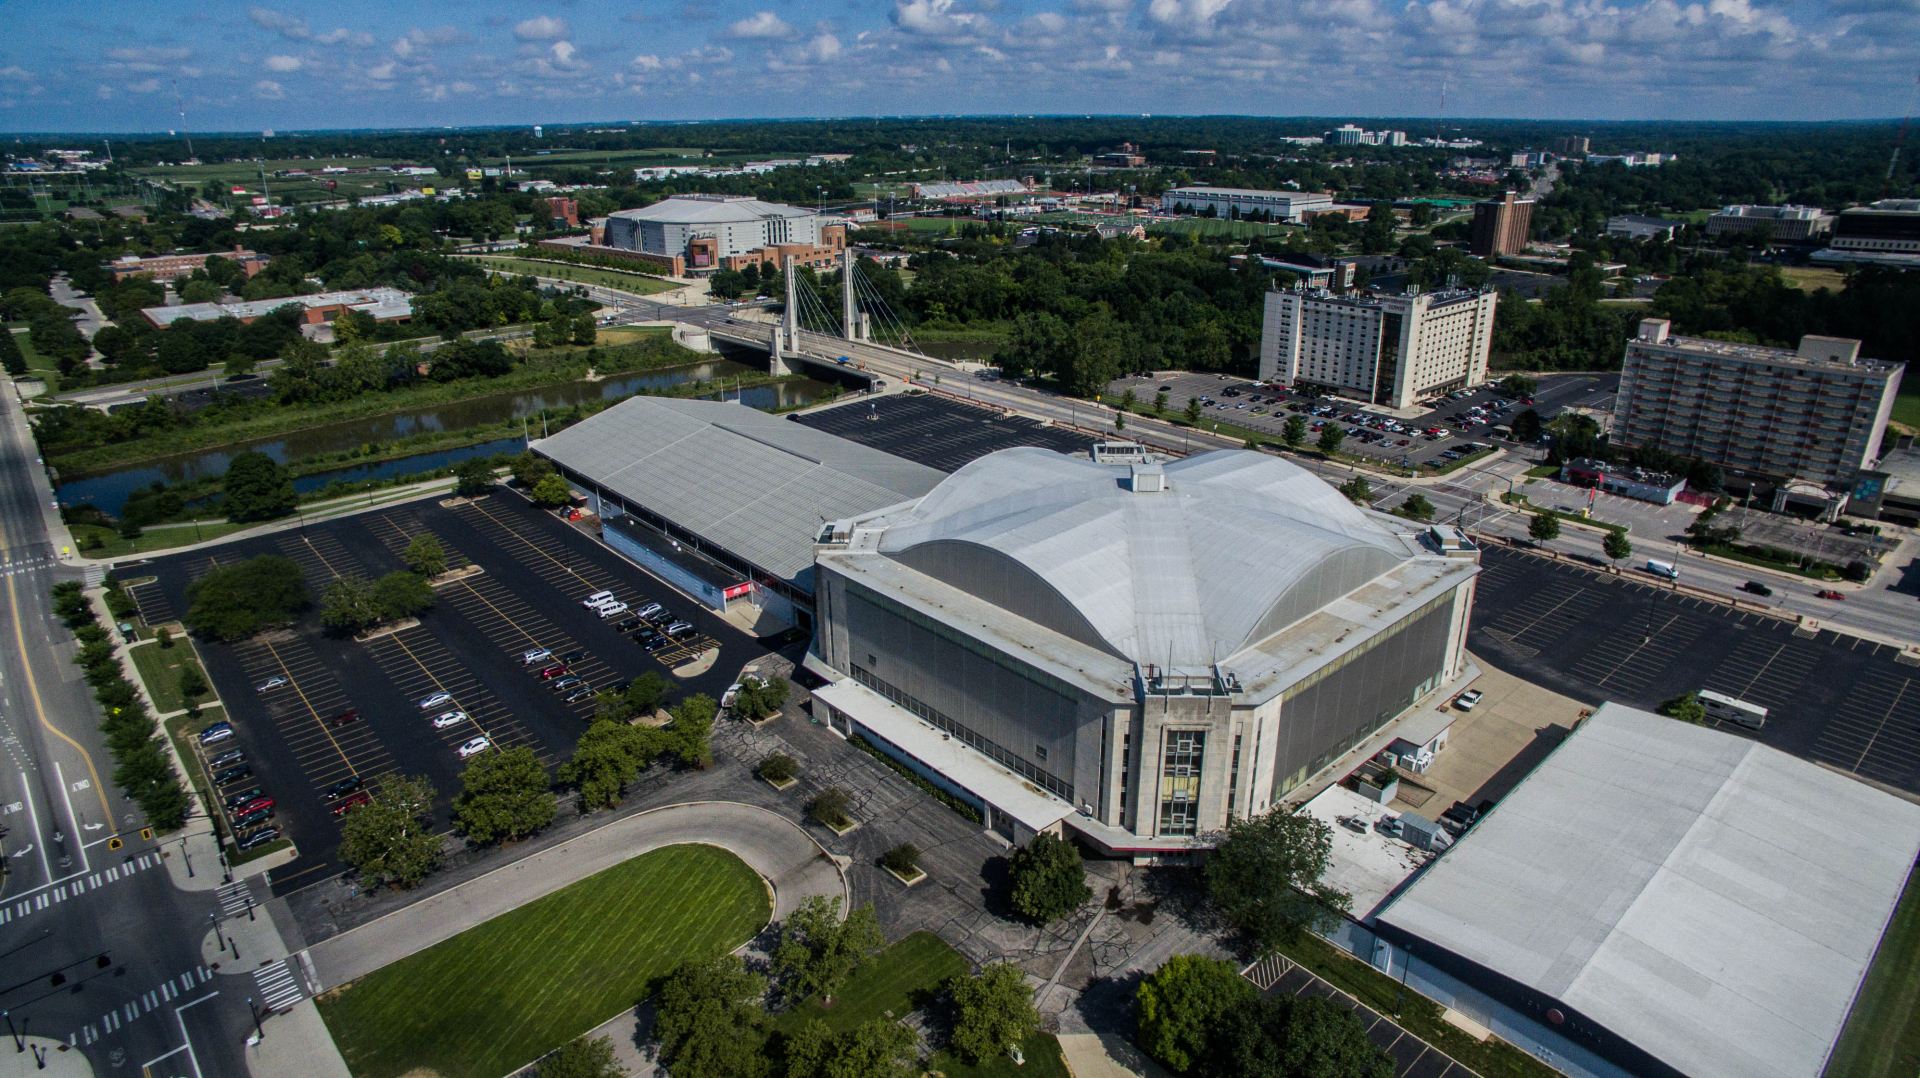 Aerial photo of St. Johns Arena with the Schottenstein Center in the backgroud.